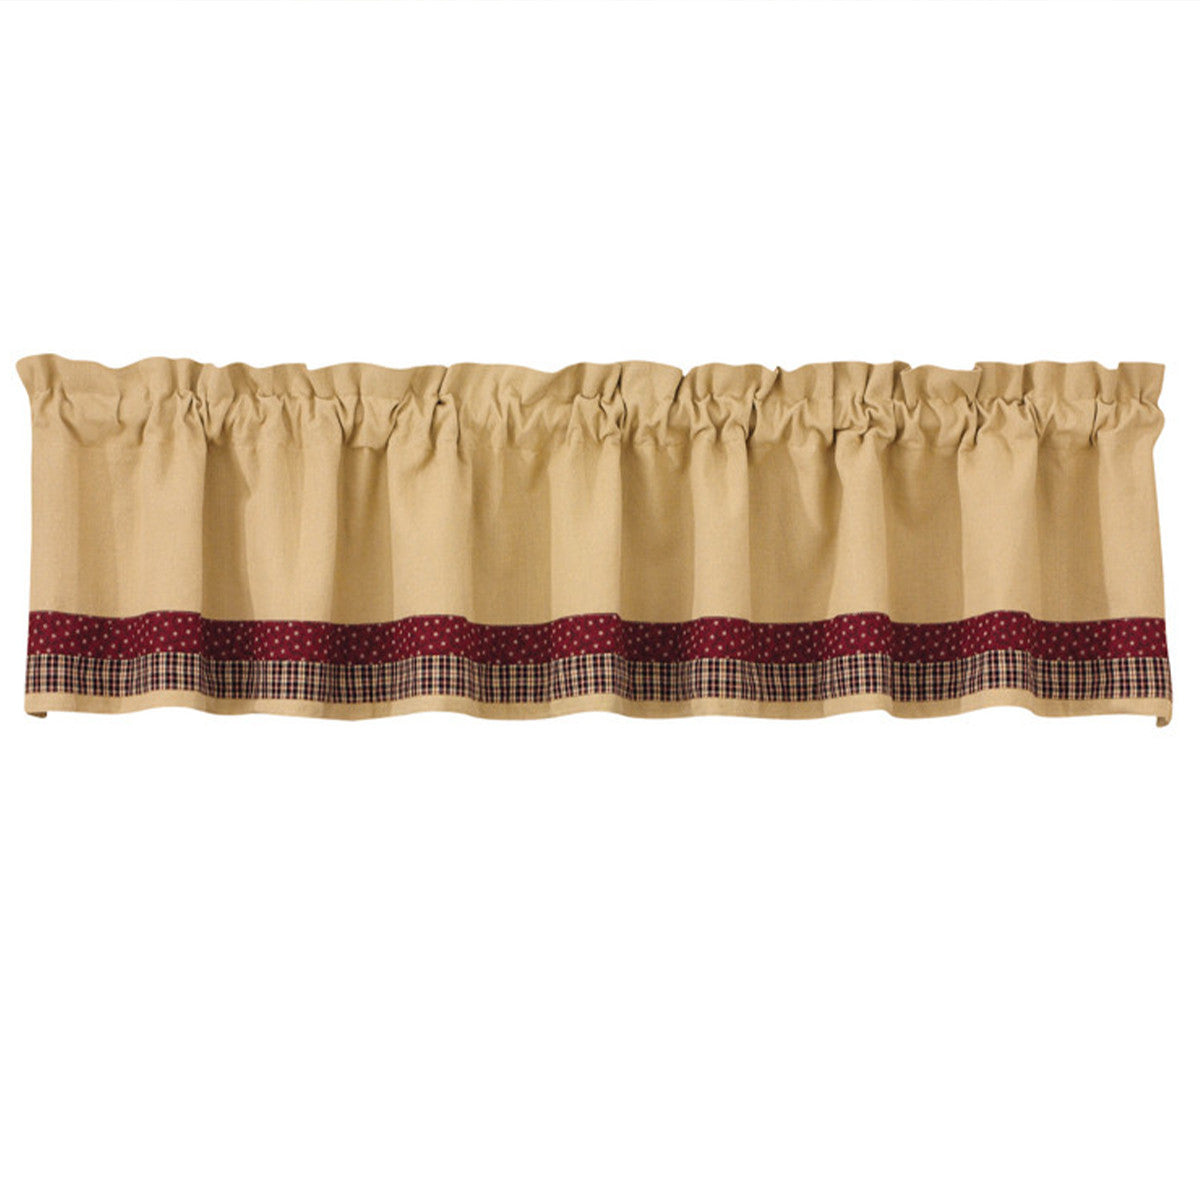 My Country Home Lined Border Valance 72" x 14" Set of 2 Park designs